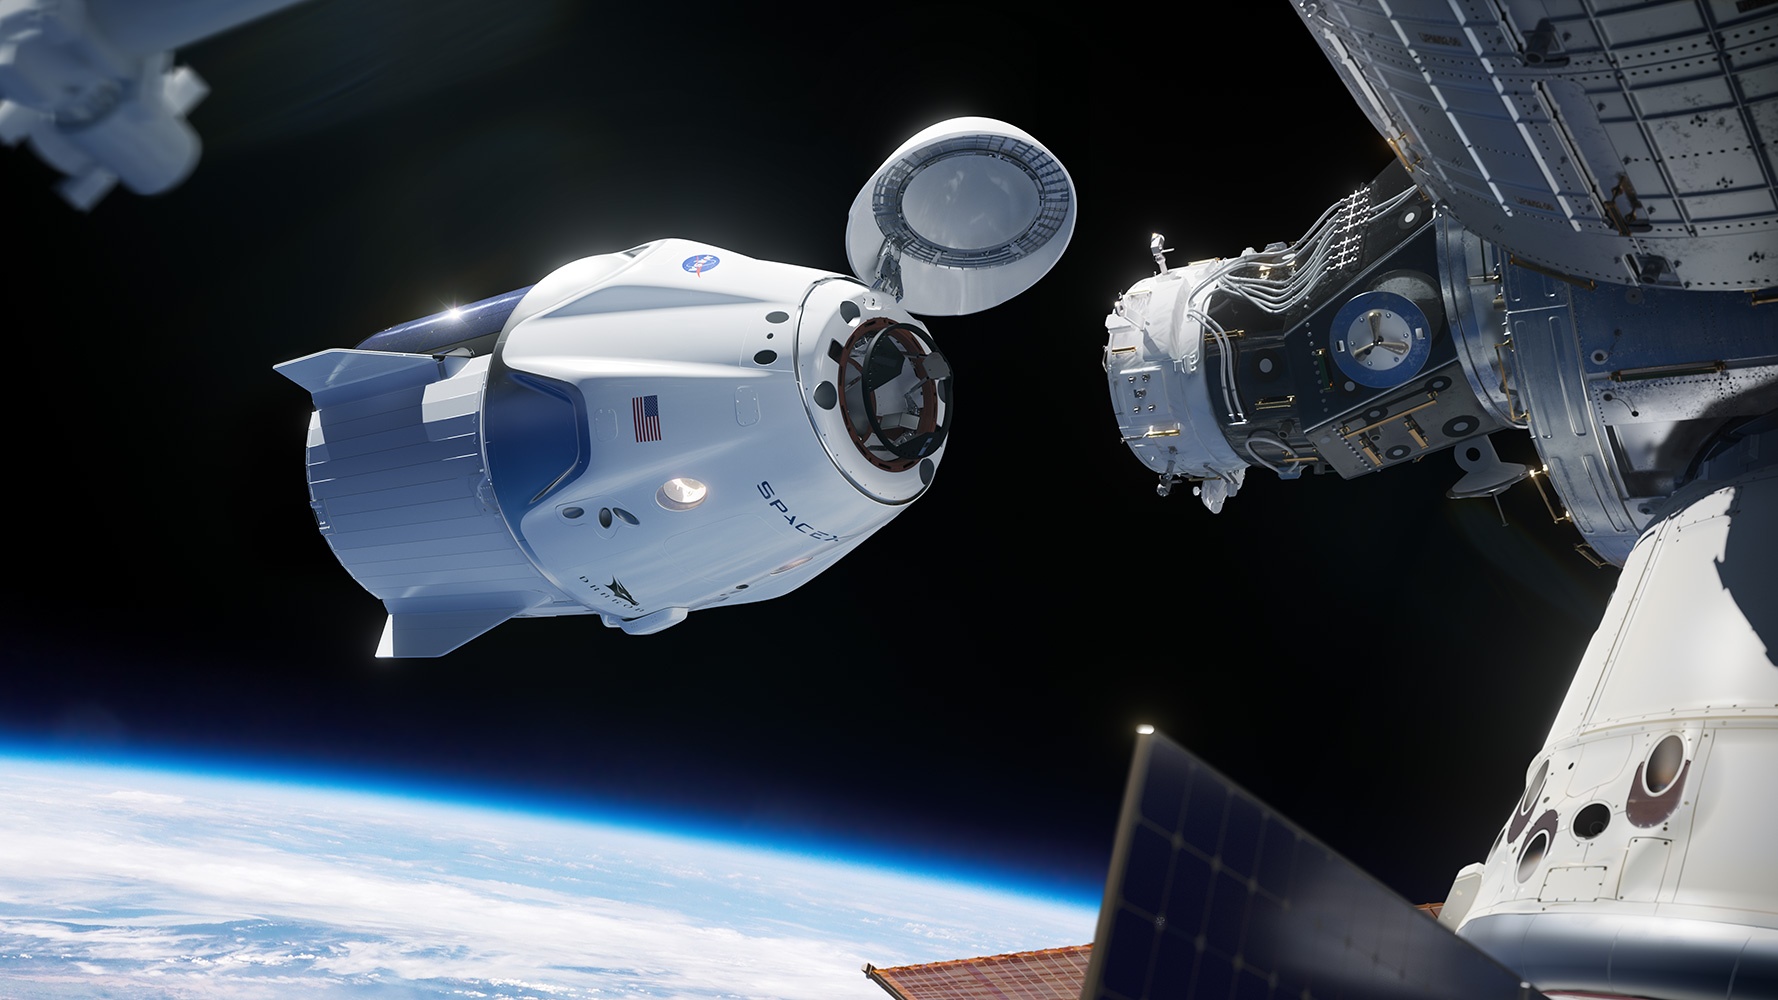 Illustration: SpaceX Crew Dragon at ISS